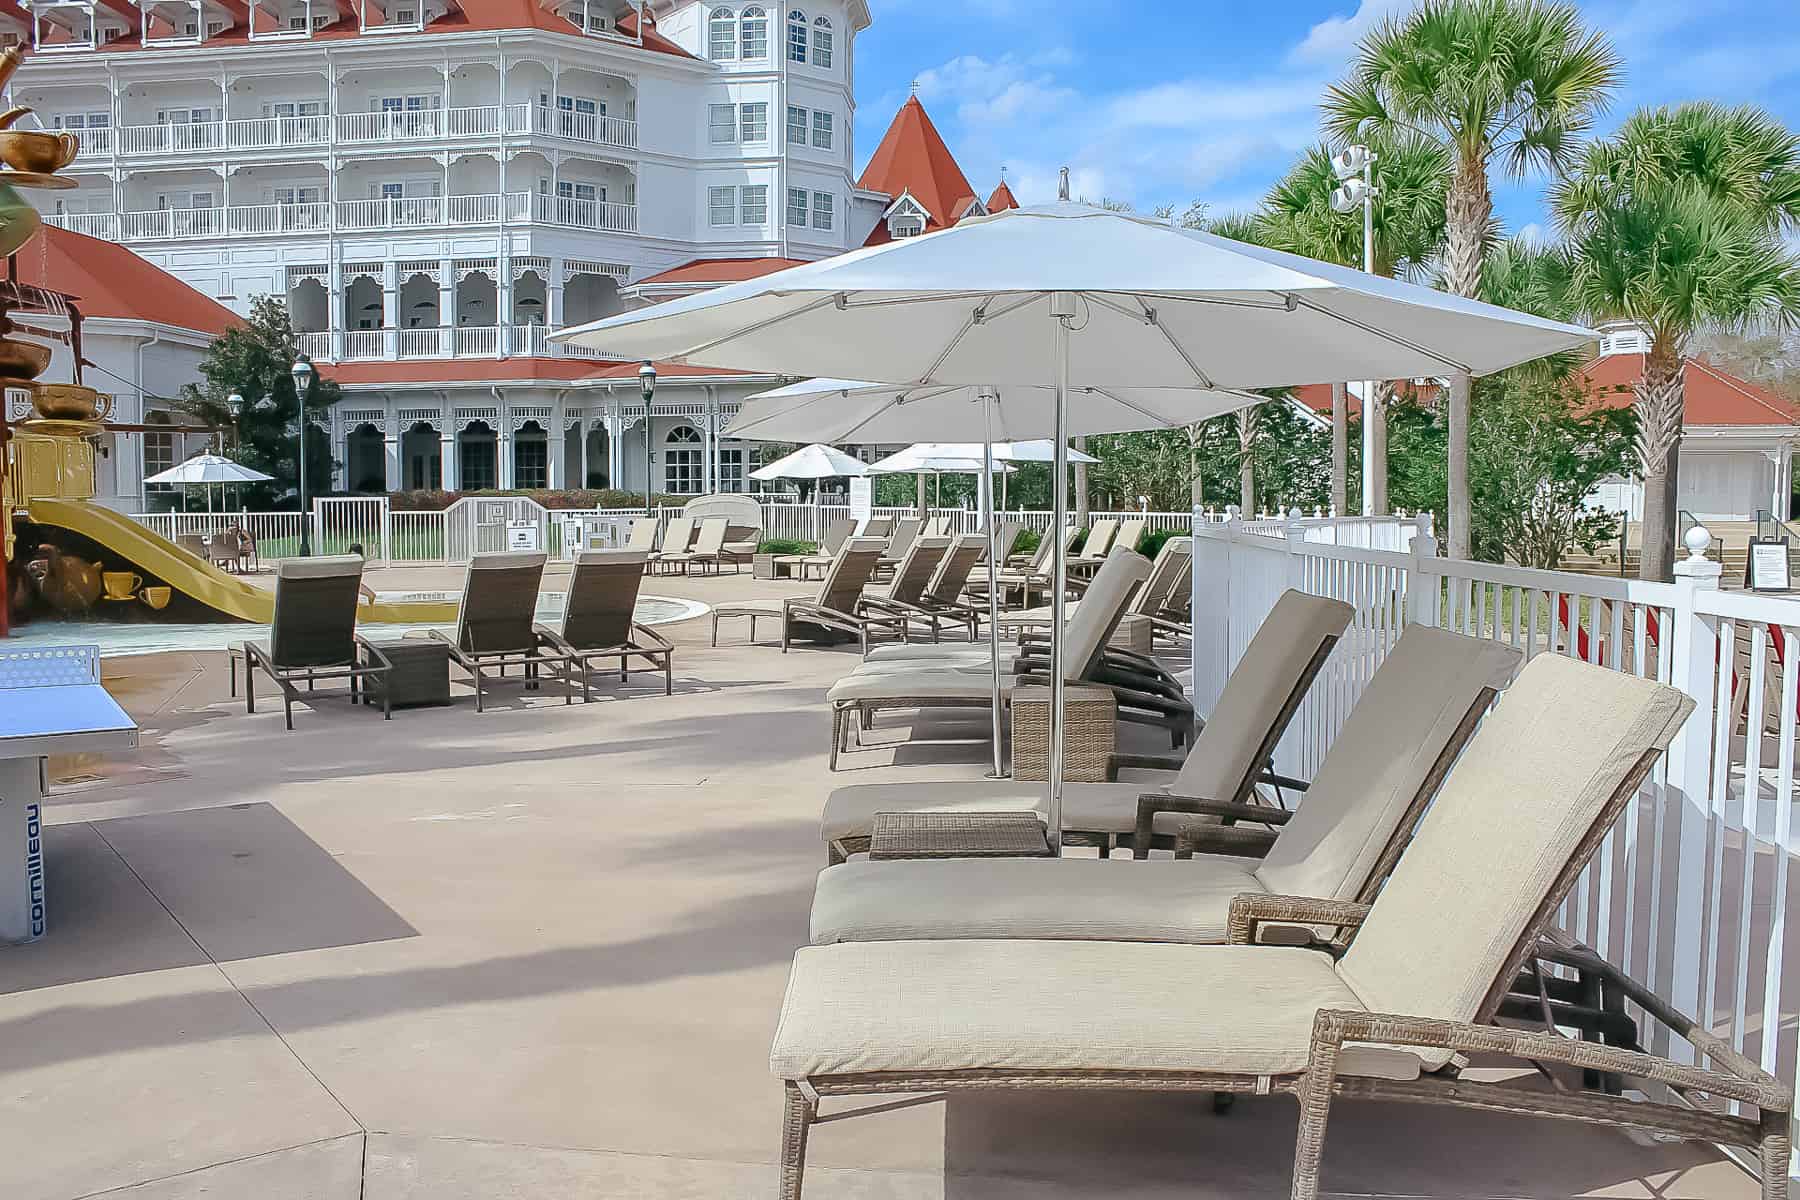 Lounge Chairs at the Pool at Disney's Grand Floridian 